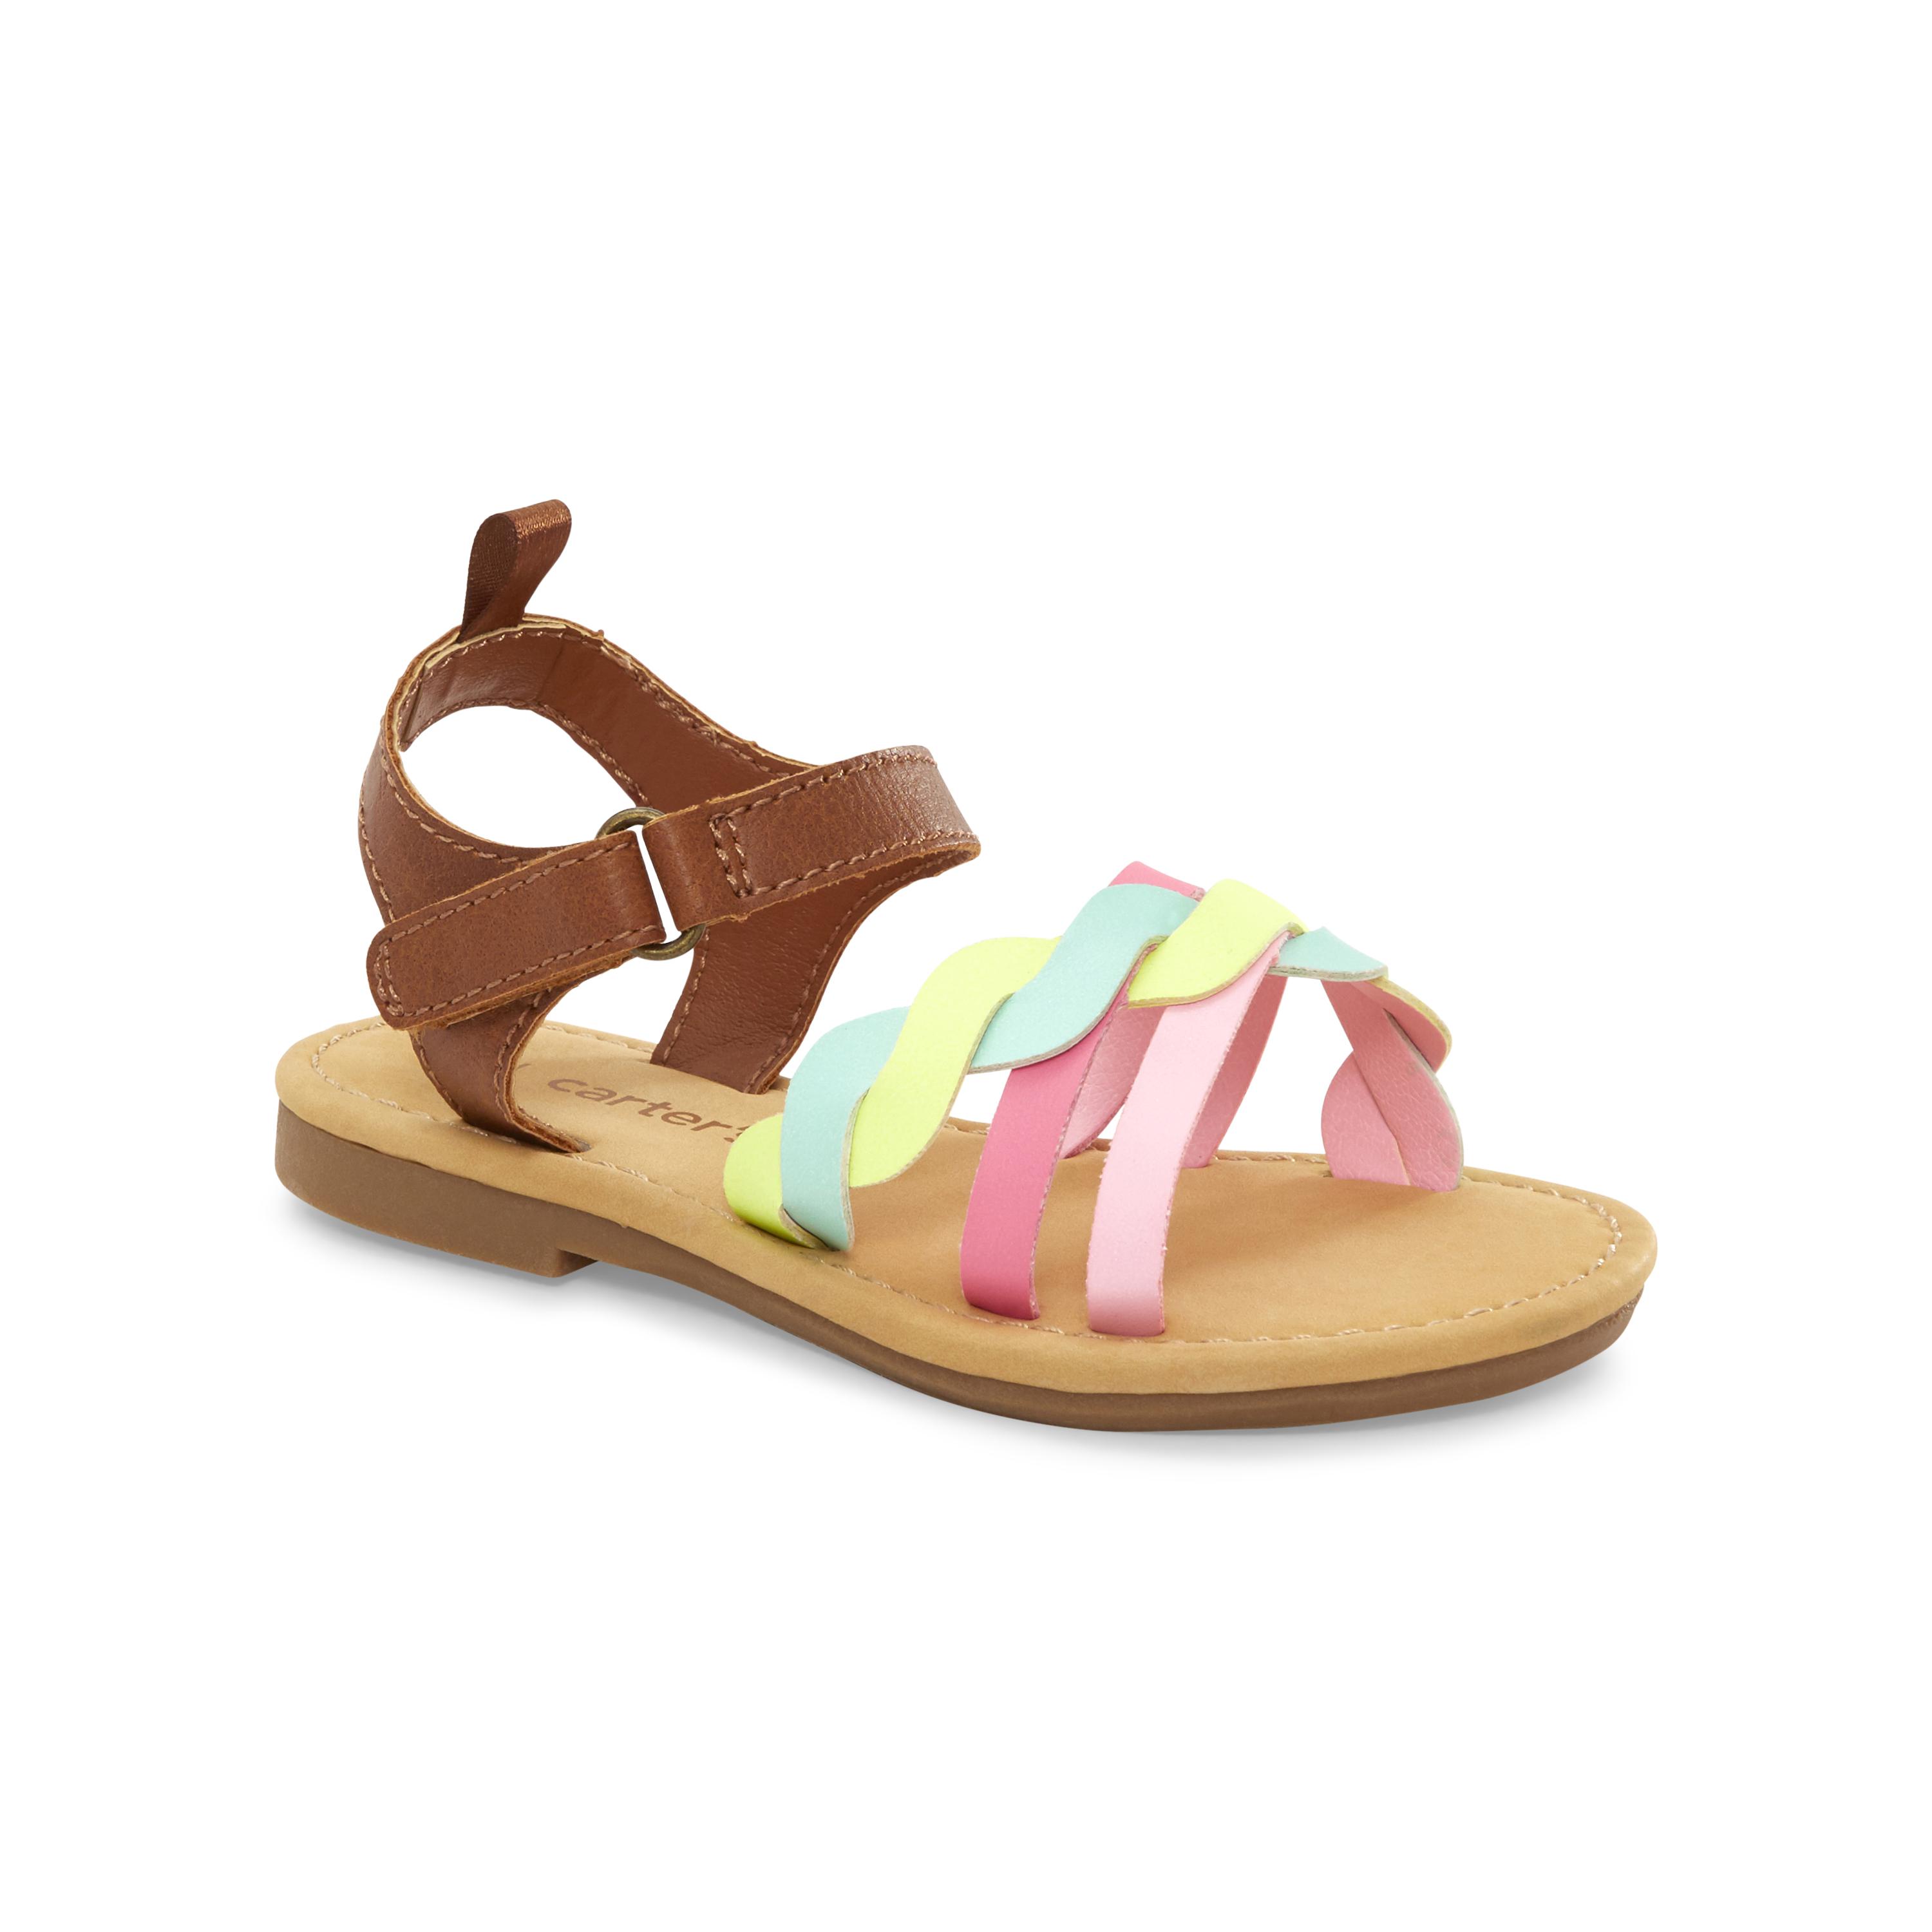 Toddler Braided Strappy Sandals